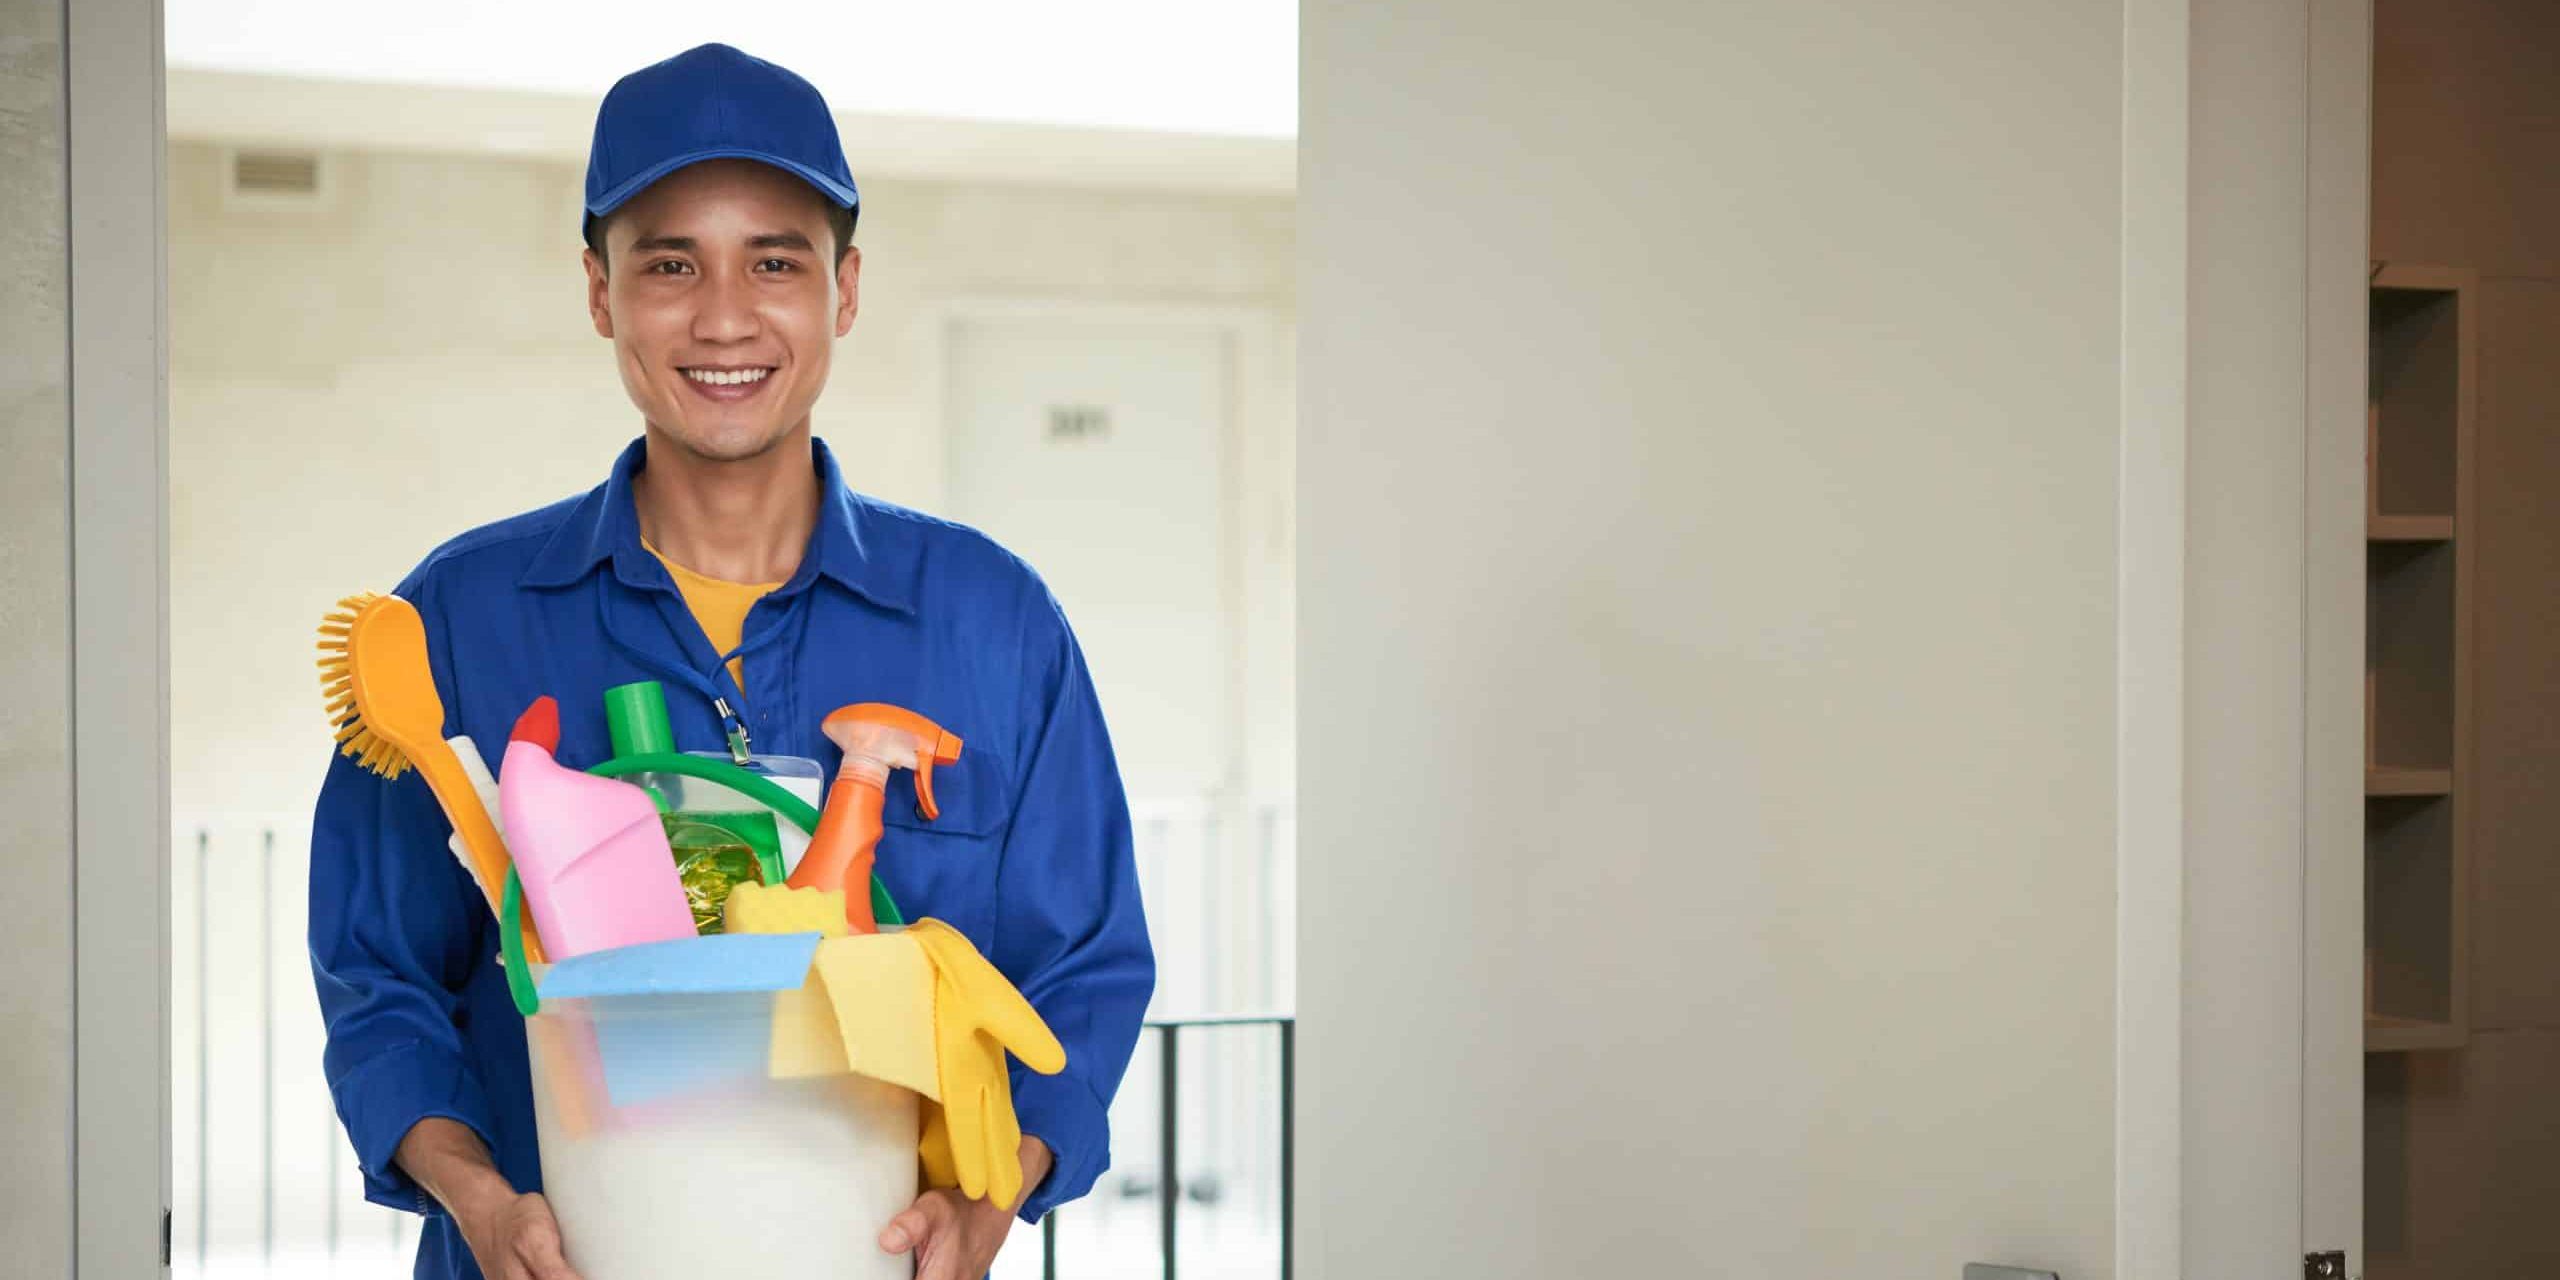 cheerful-asian-male-janitor-walking-into-hotel-room-carrying-supplies-bucket-scaled-e1718030965273.jpg